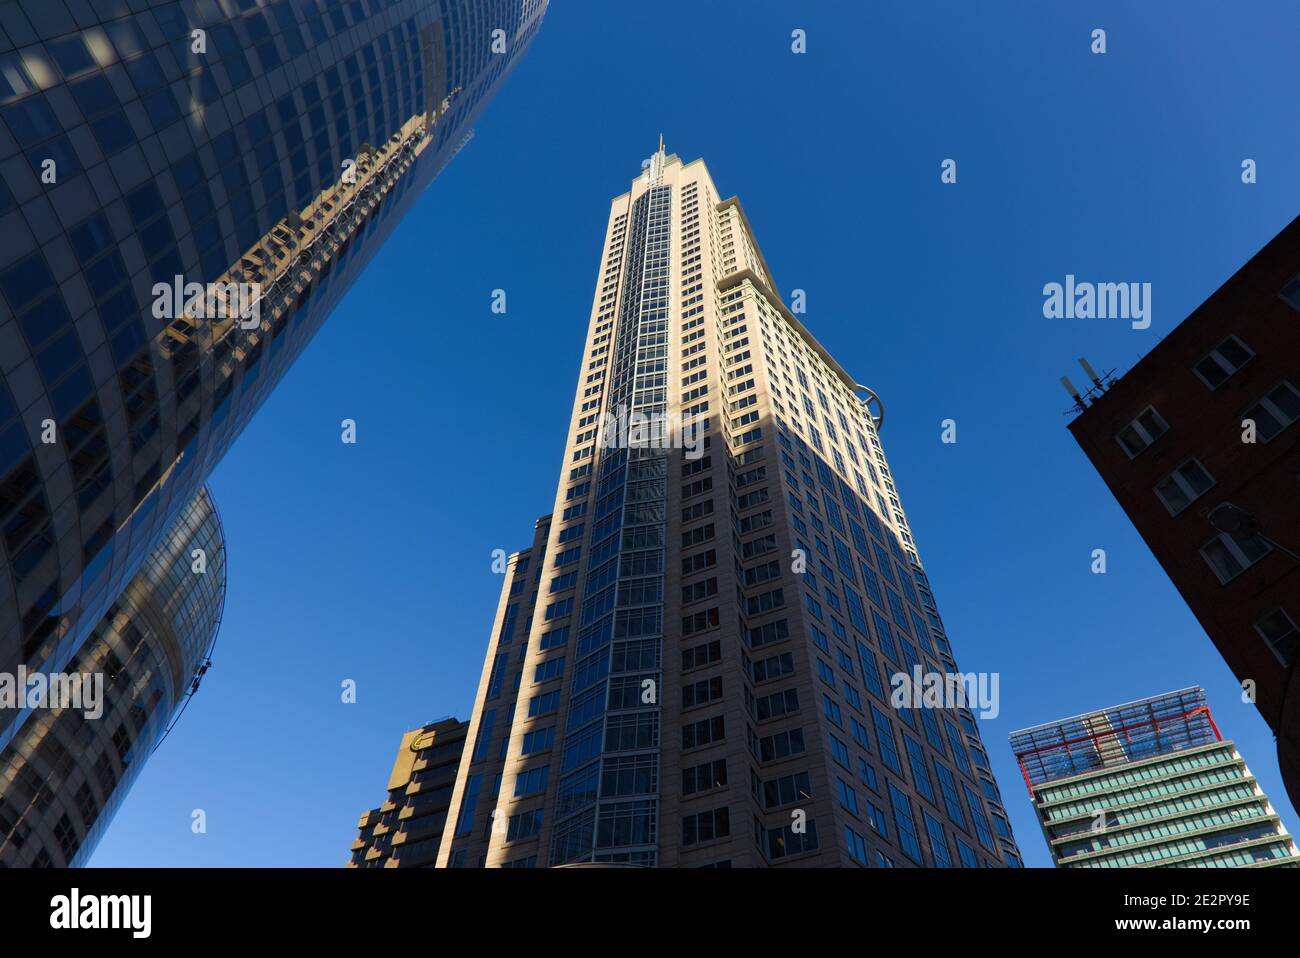 Chifley Tower is a premium skyscraper in Sydney, Australia. When measured to the top of its spire, it is considered the tallest building in Sydney. Stock Photo